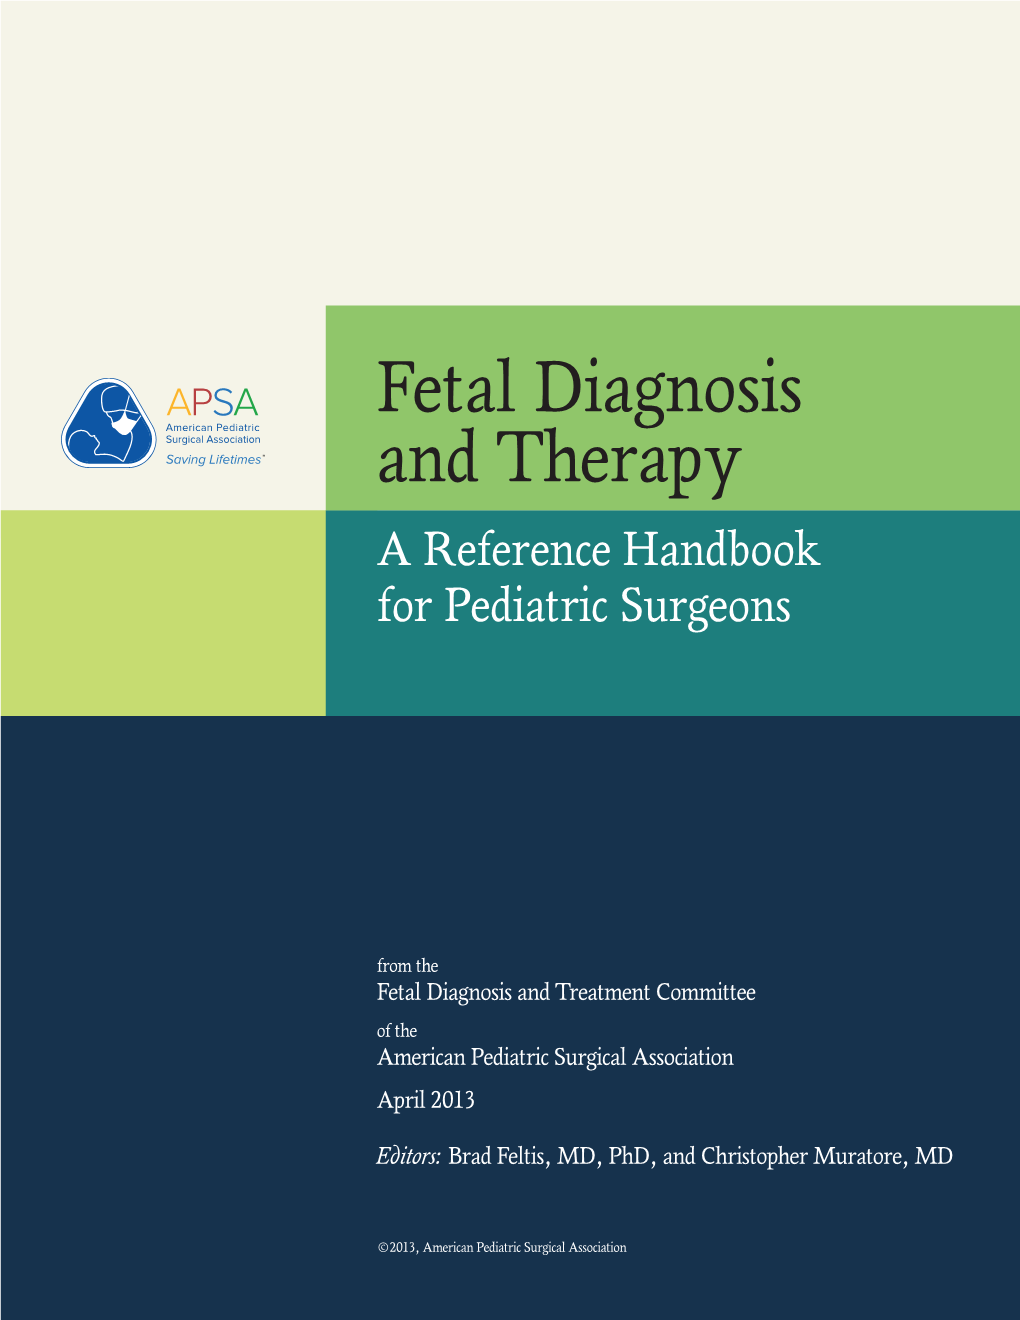 Handbook of Fetal Diagnosis and Therapy with Table of Contents FNL